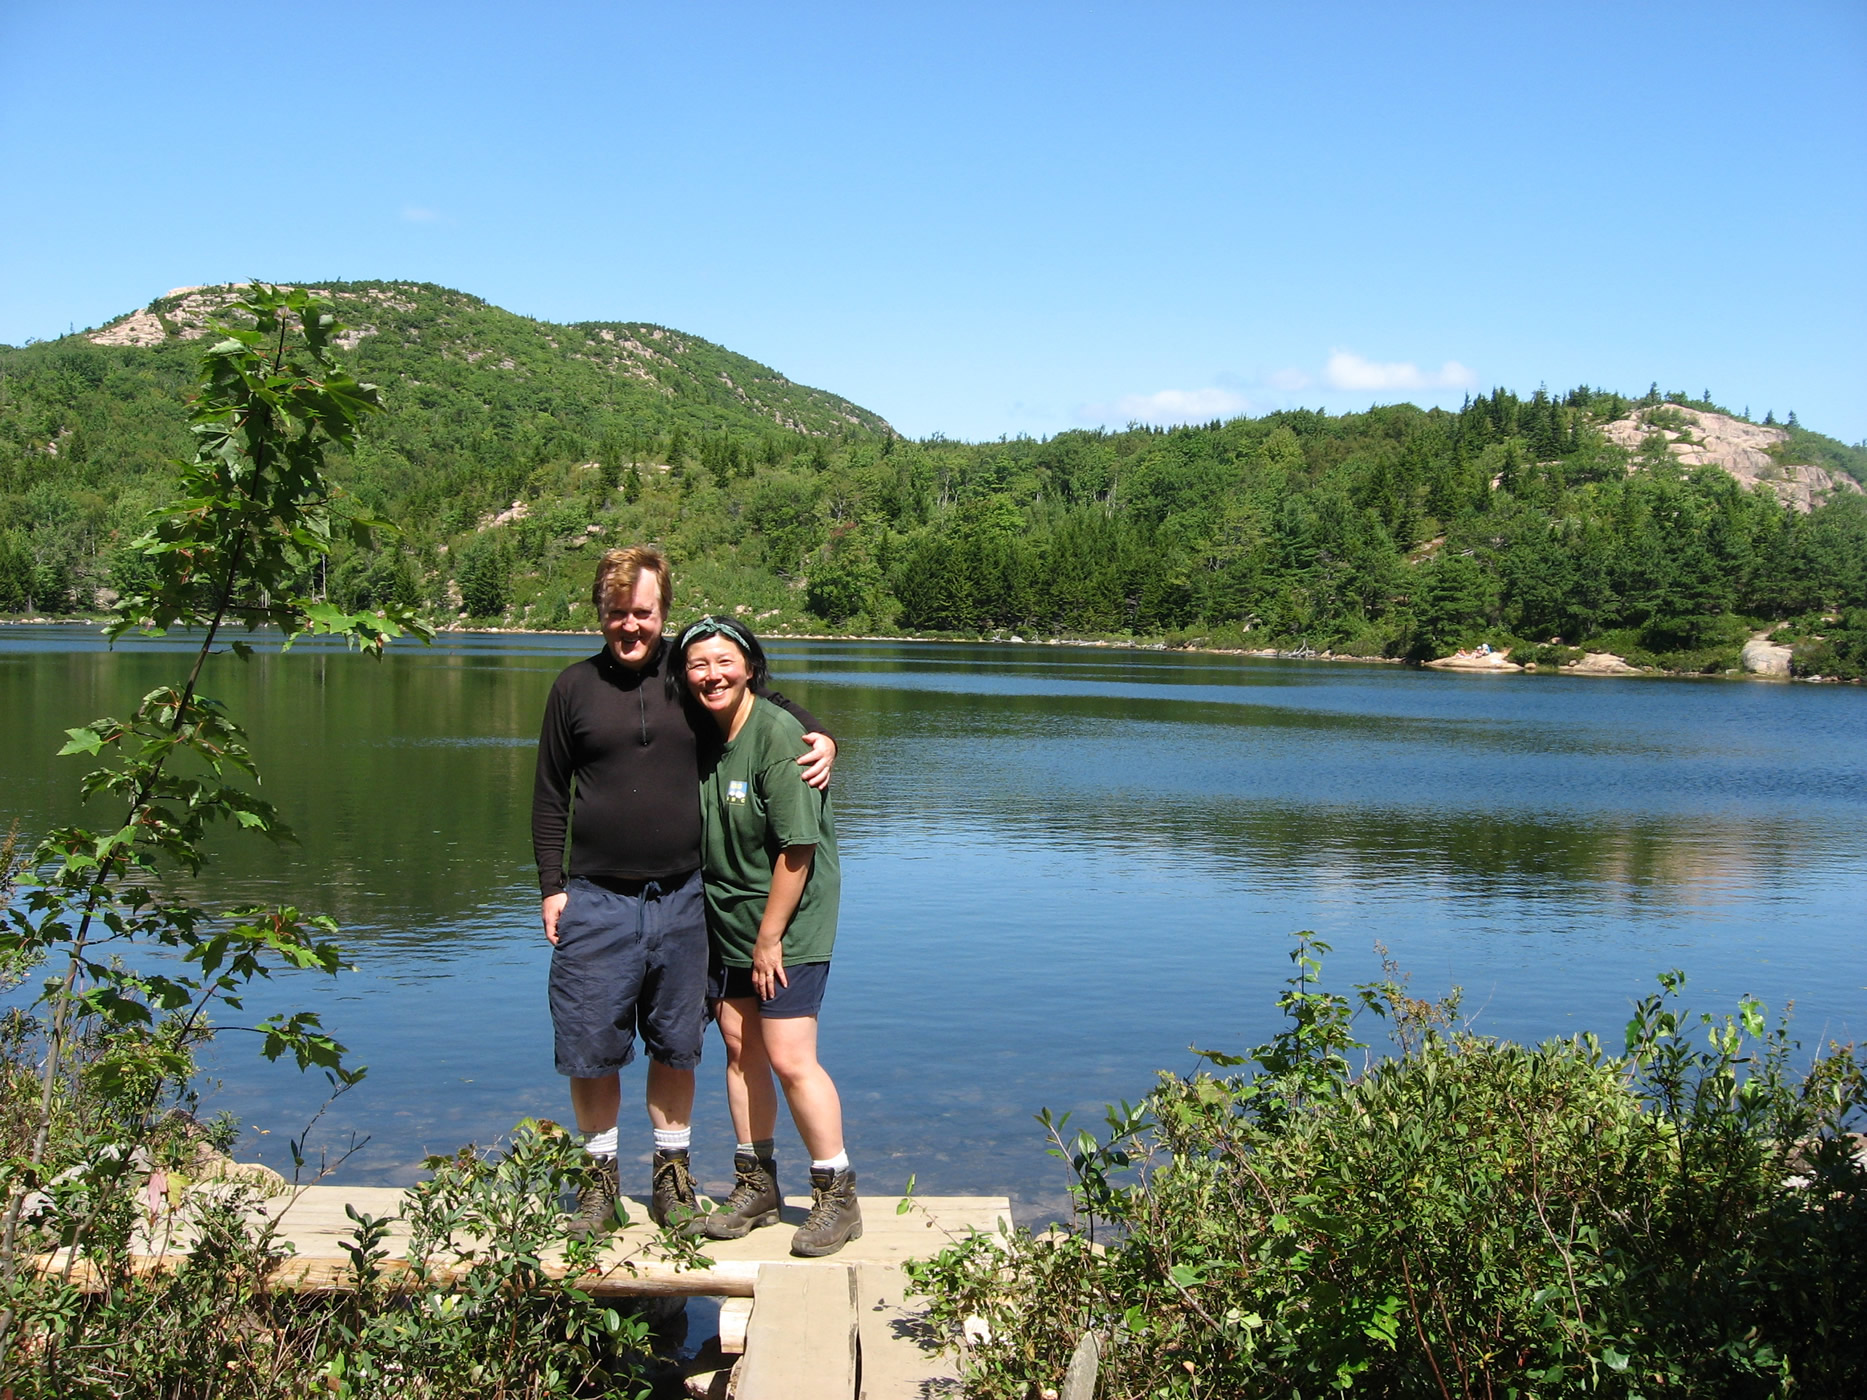 The authors, Dan Ring and Dolores Kong, on the Bowl Trail in Acadia National Park. This spot is at about Virtual Mile 12.7 of the 100-mile Acadia Centennial Trek, according to our virtual guide for the Trek.